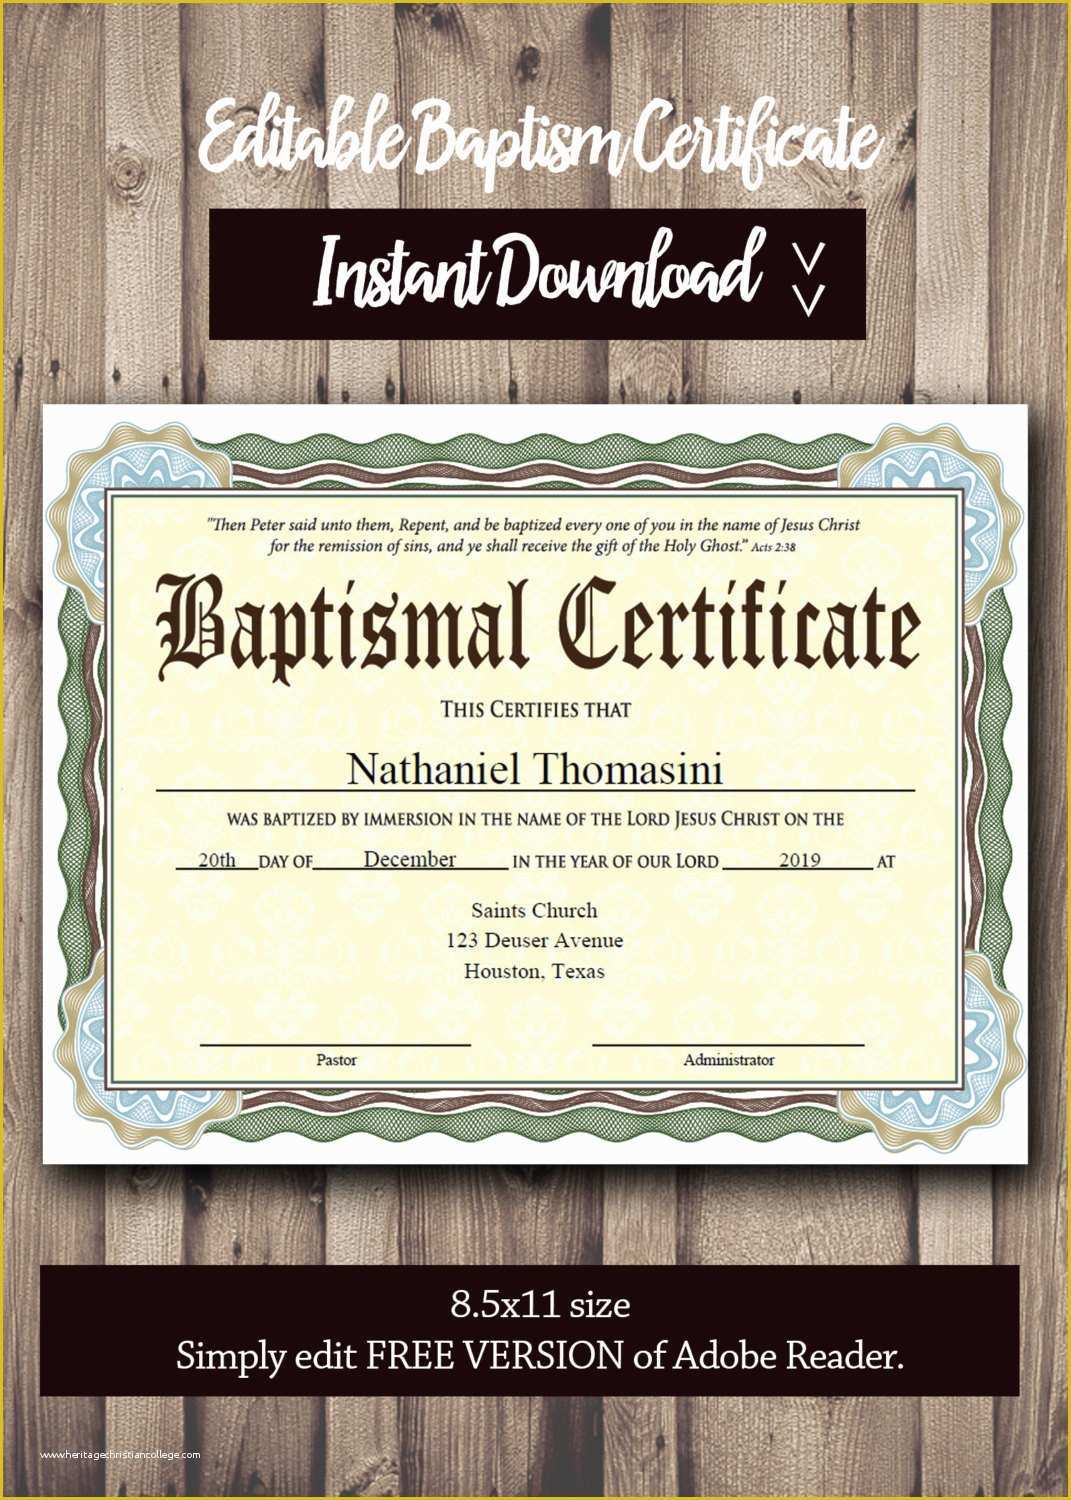 Free Editable Baptism Certificate Template Of Baptism Certificate Template Pdf Adobe Reader Editable File